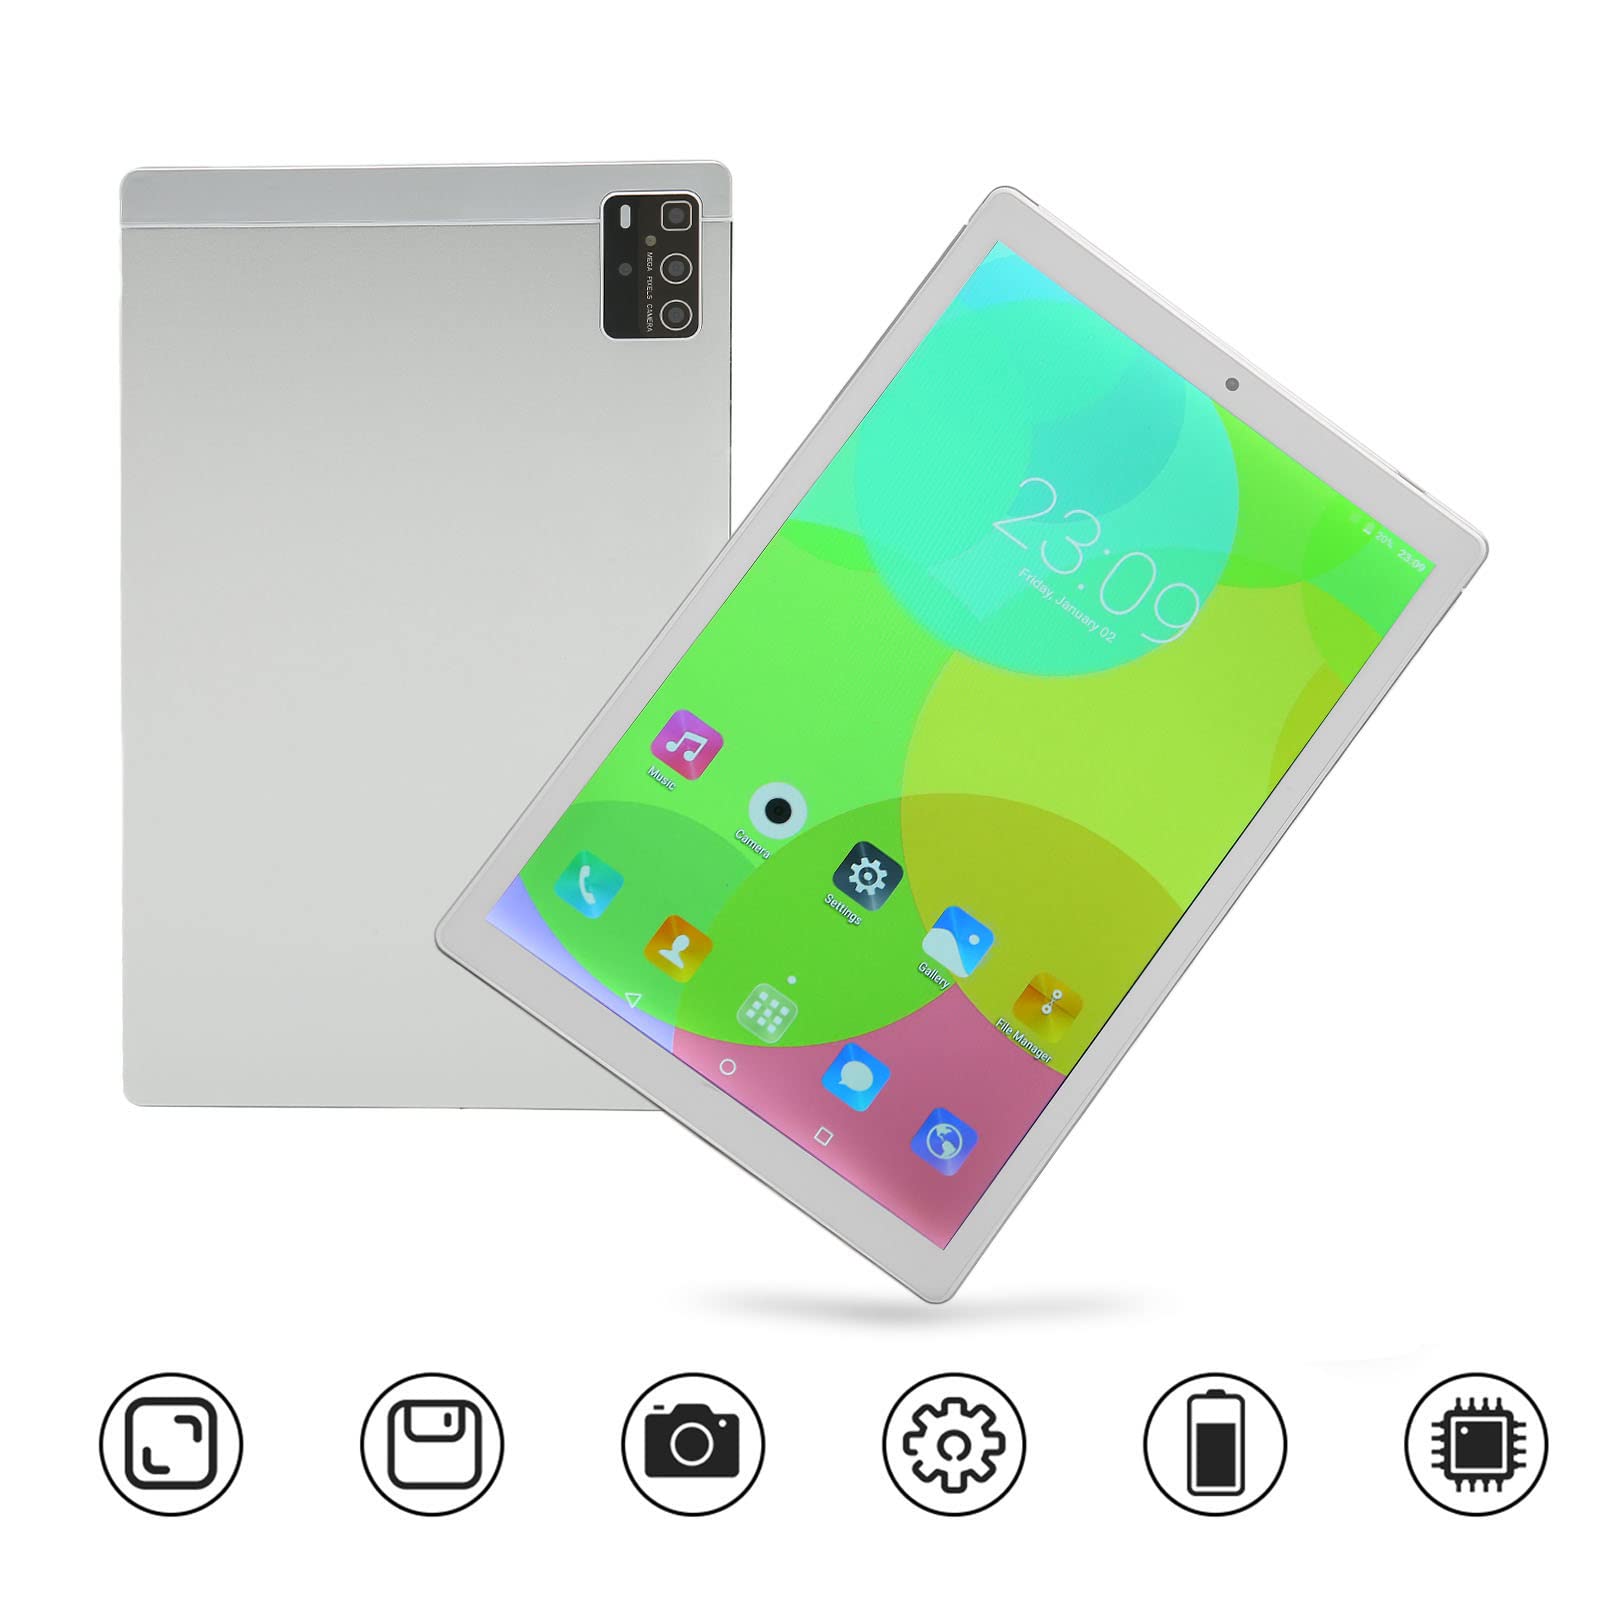 Luqeeg 10in Tablet - 6GB RAM 128GB ROM, 2560x1600 IPS Touchscreen 2.4G 5G WiFi Tablet with Dual Speakers 8 Core CPU Calling Tablet with 5MP 8MP Dual Camera for 11, Silver